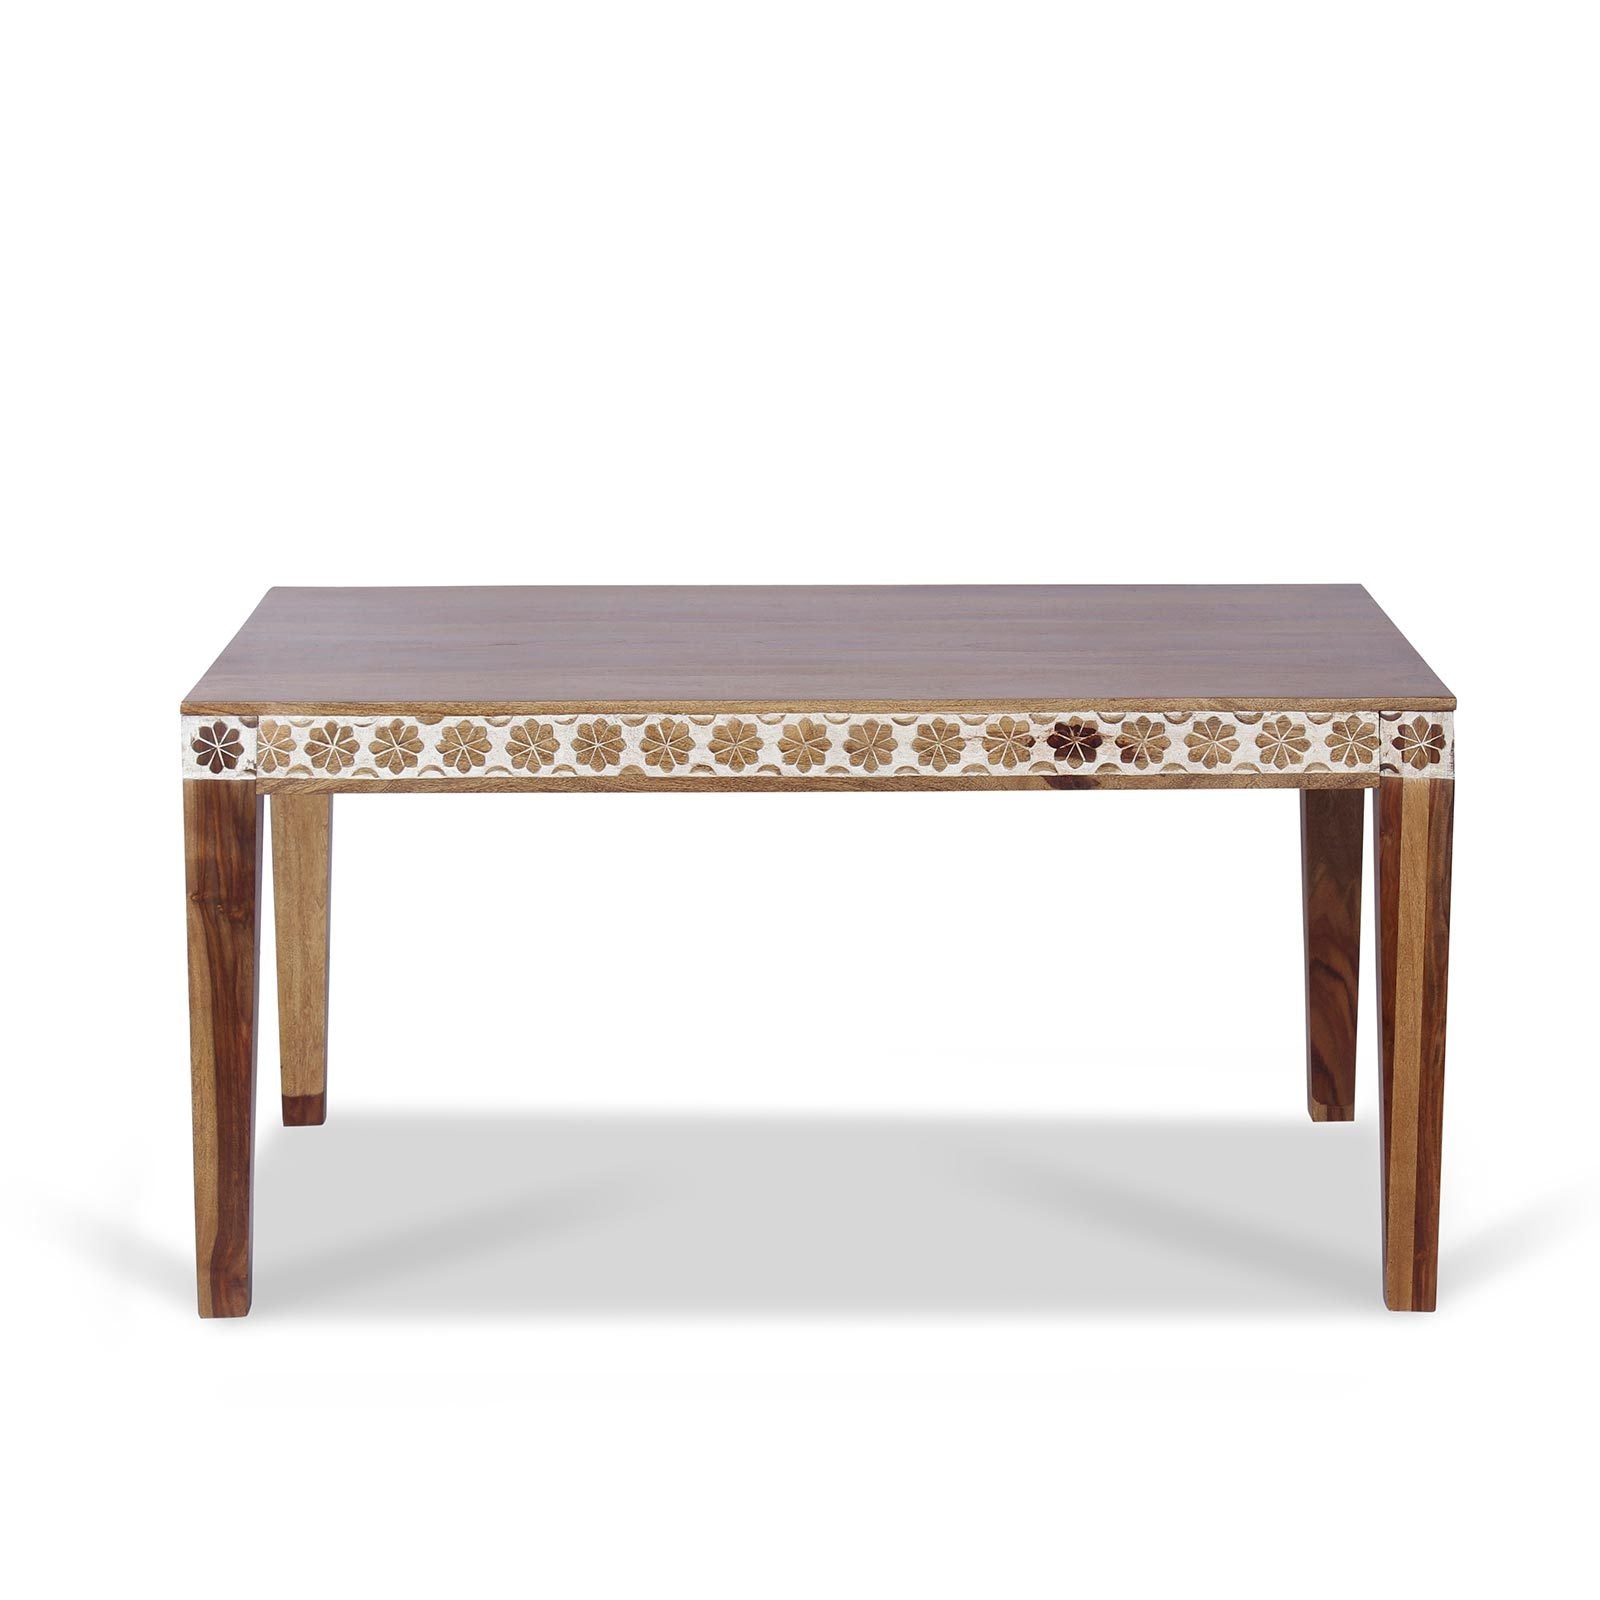 Buy dining table online